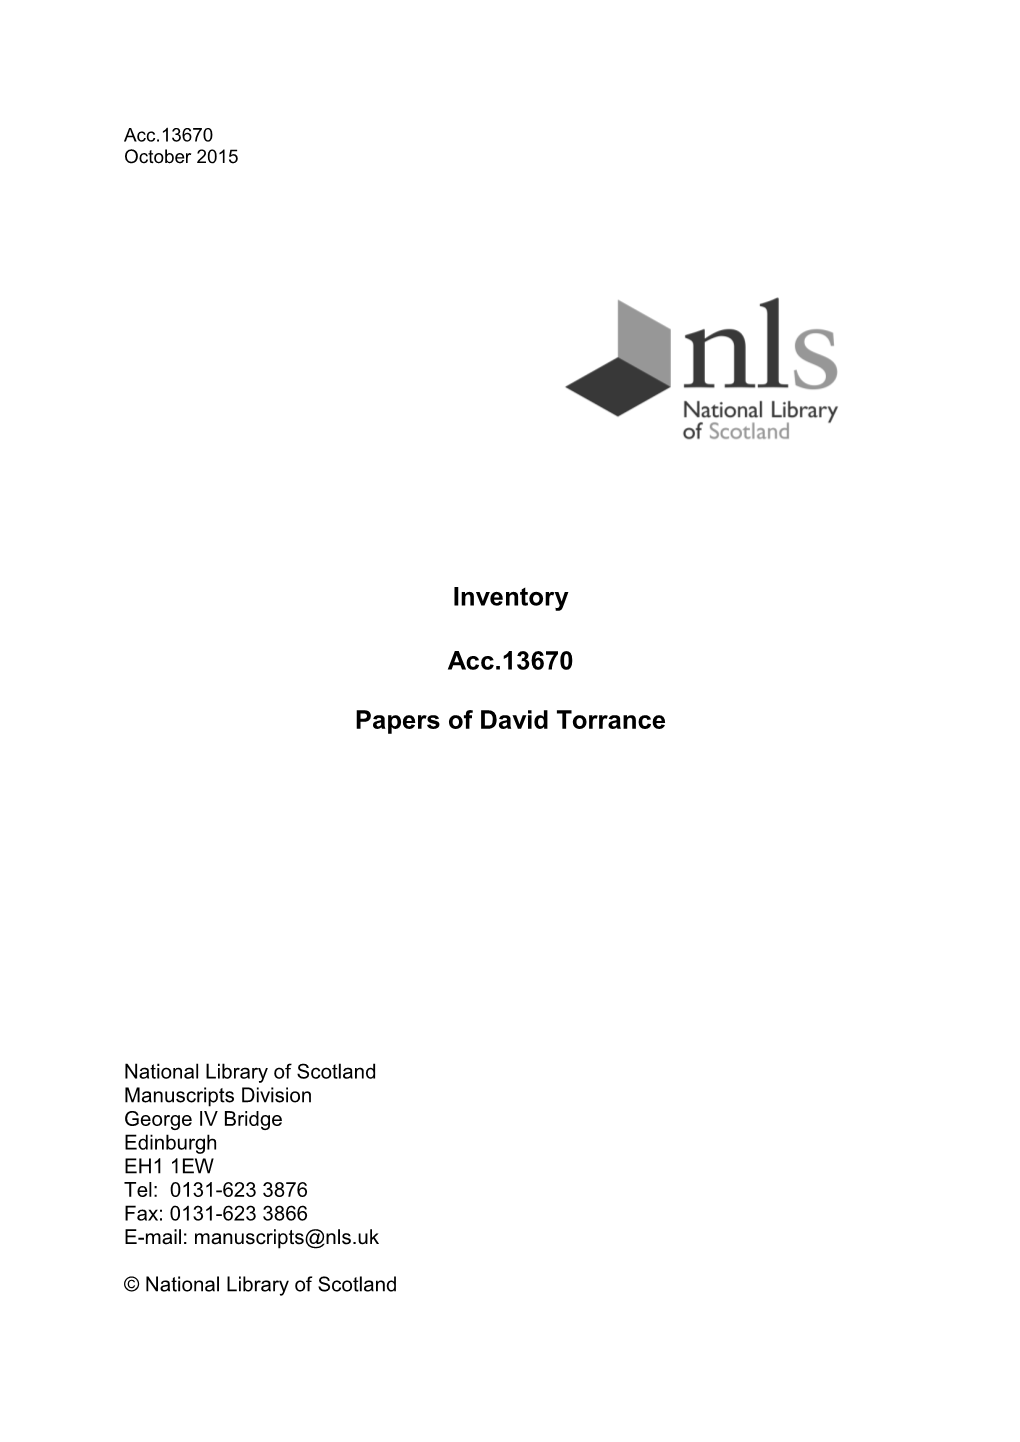 Inventory Acc.13670 Papers of David Torrance